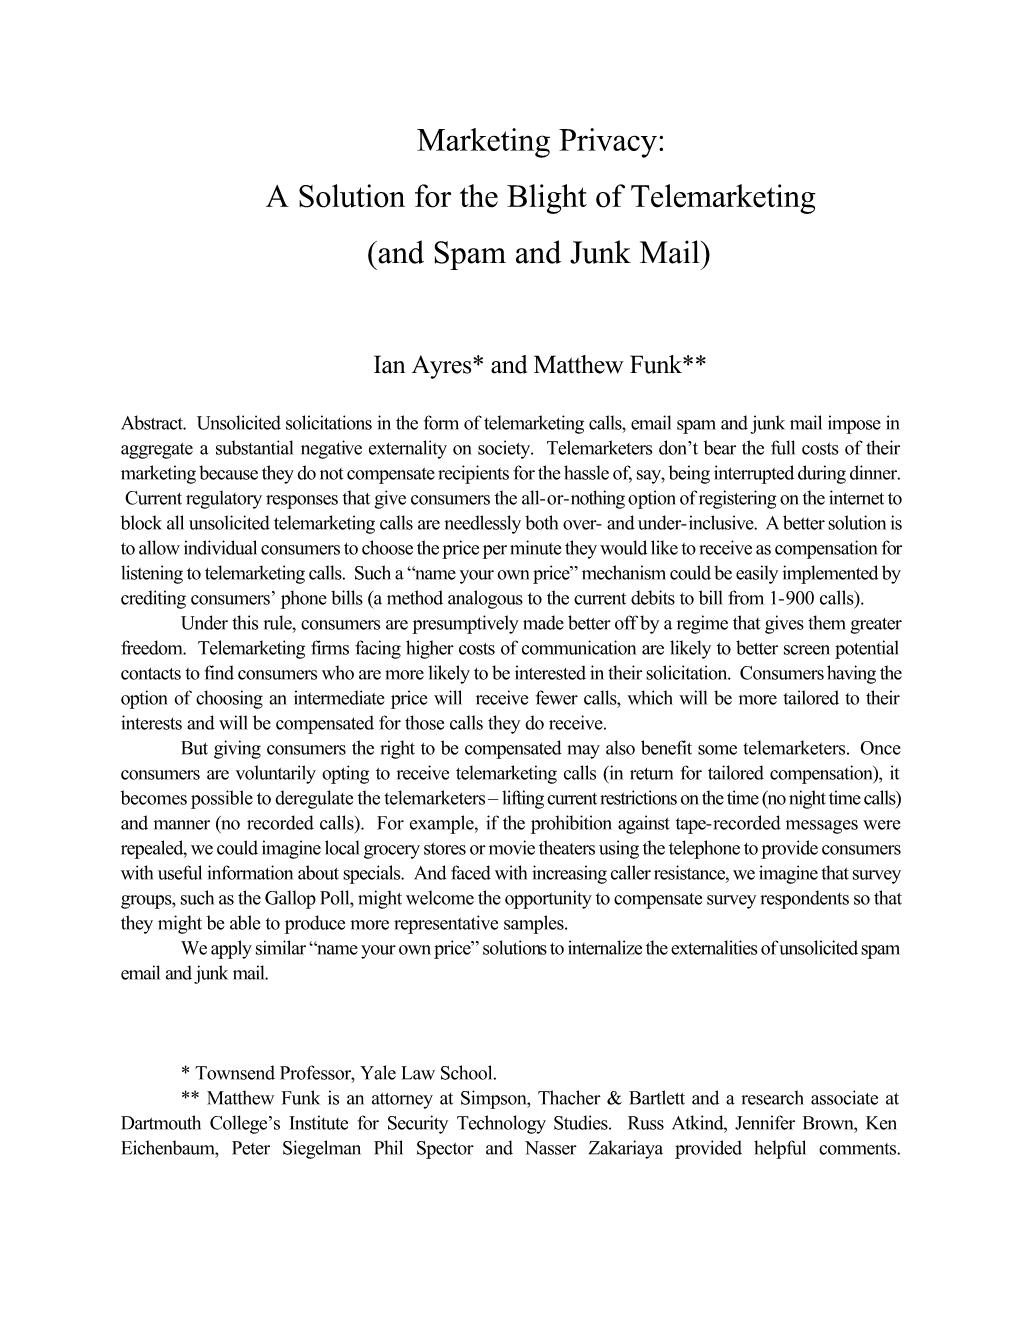 Marketing Privacy: a Solution for the Blight of Telemarketing